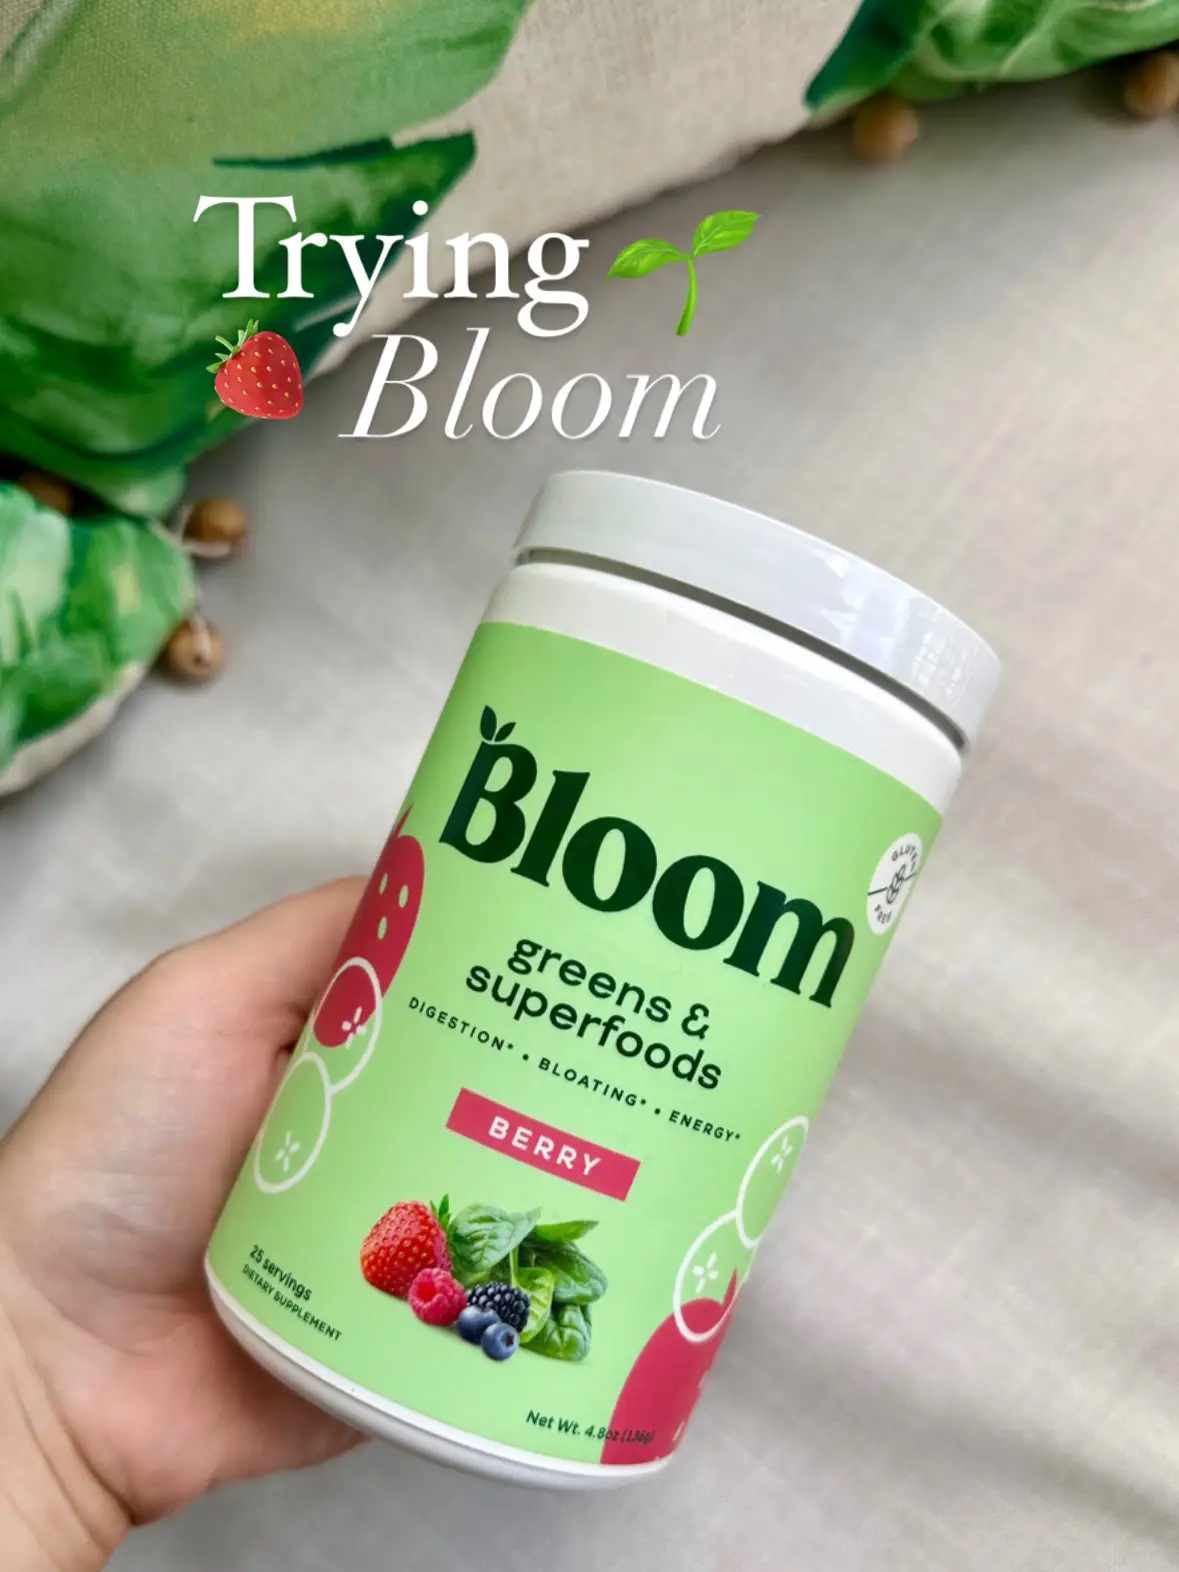 Trying Bloom greens & superfoods ✨💚